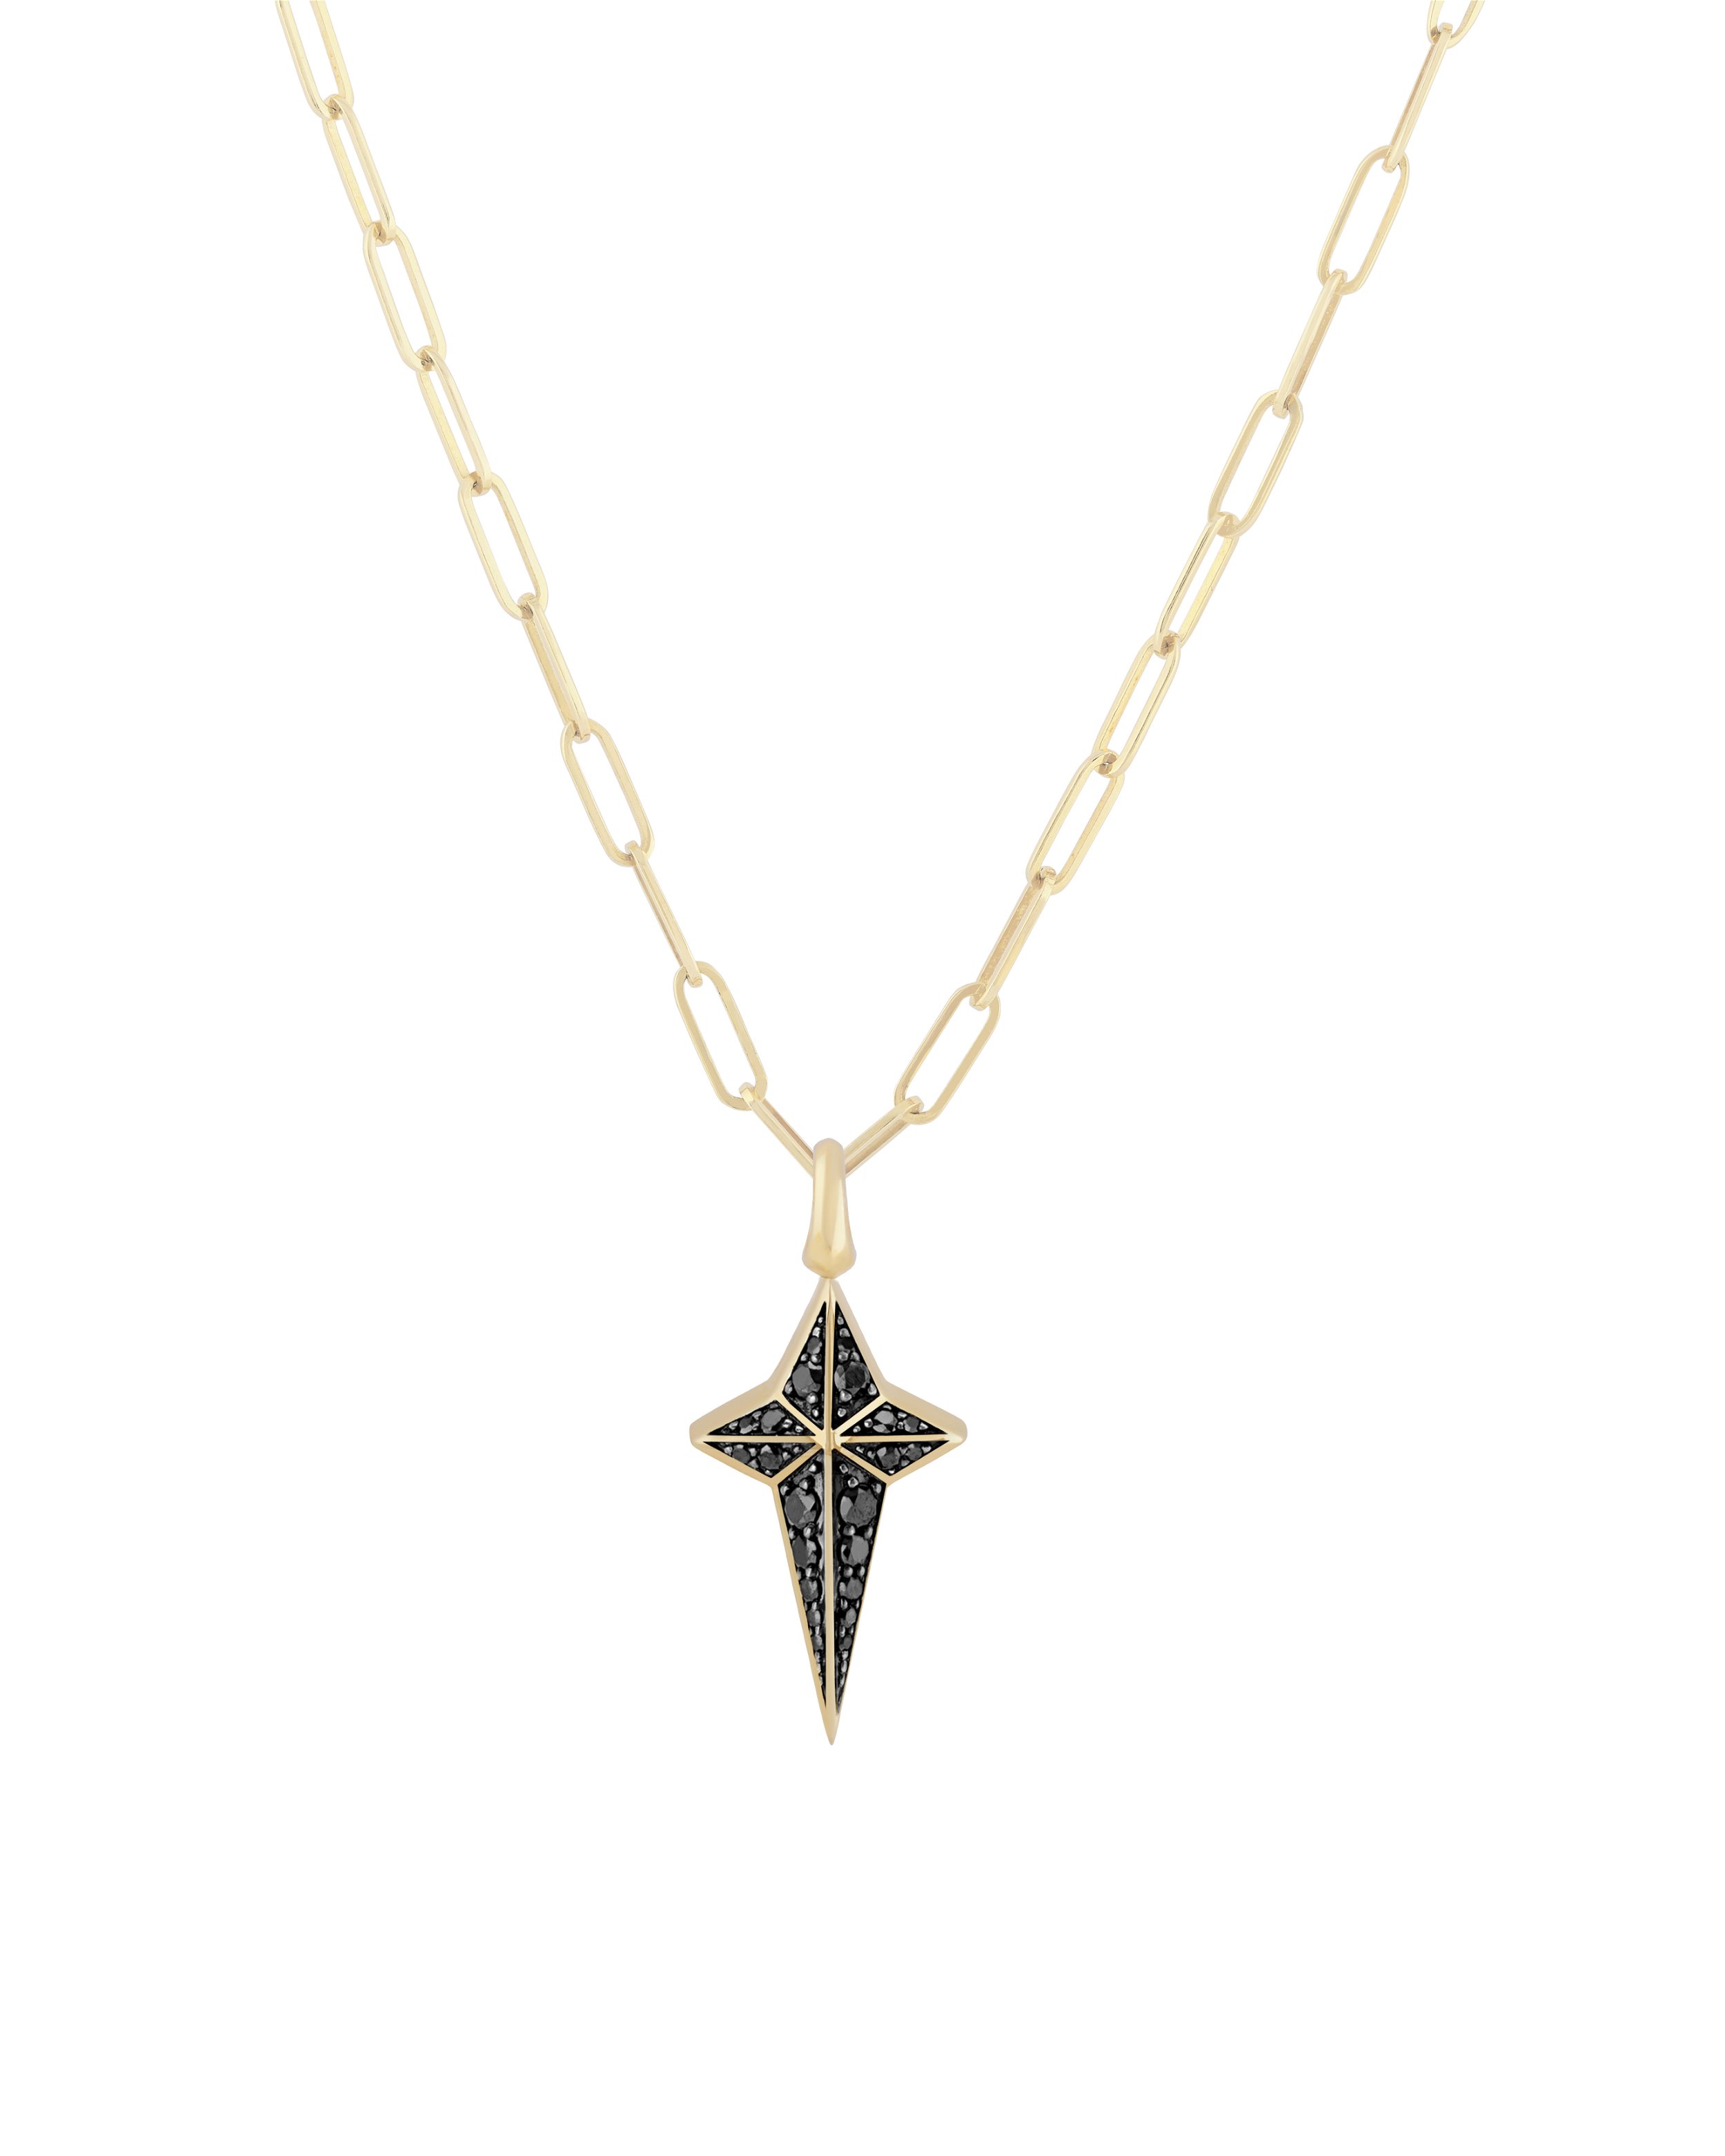 Unisex New Cross Pendant Necklace with Black Diamonds in 18kt Yellow Gold - 24"